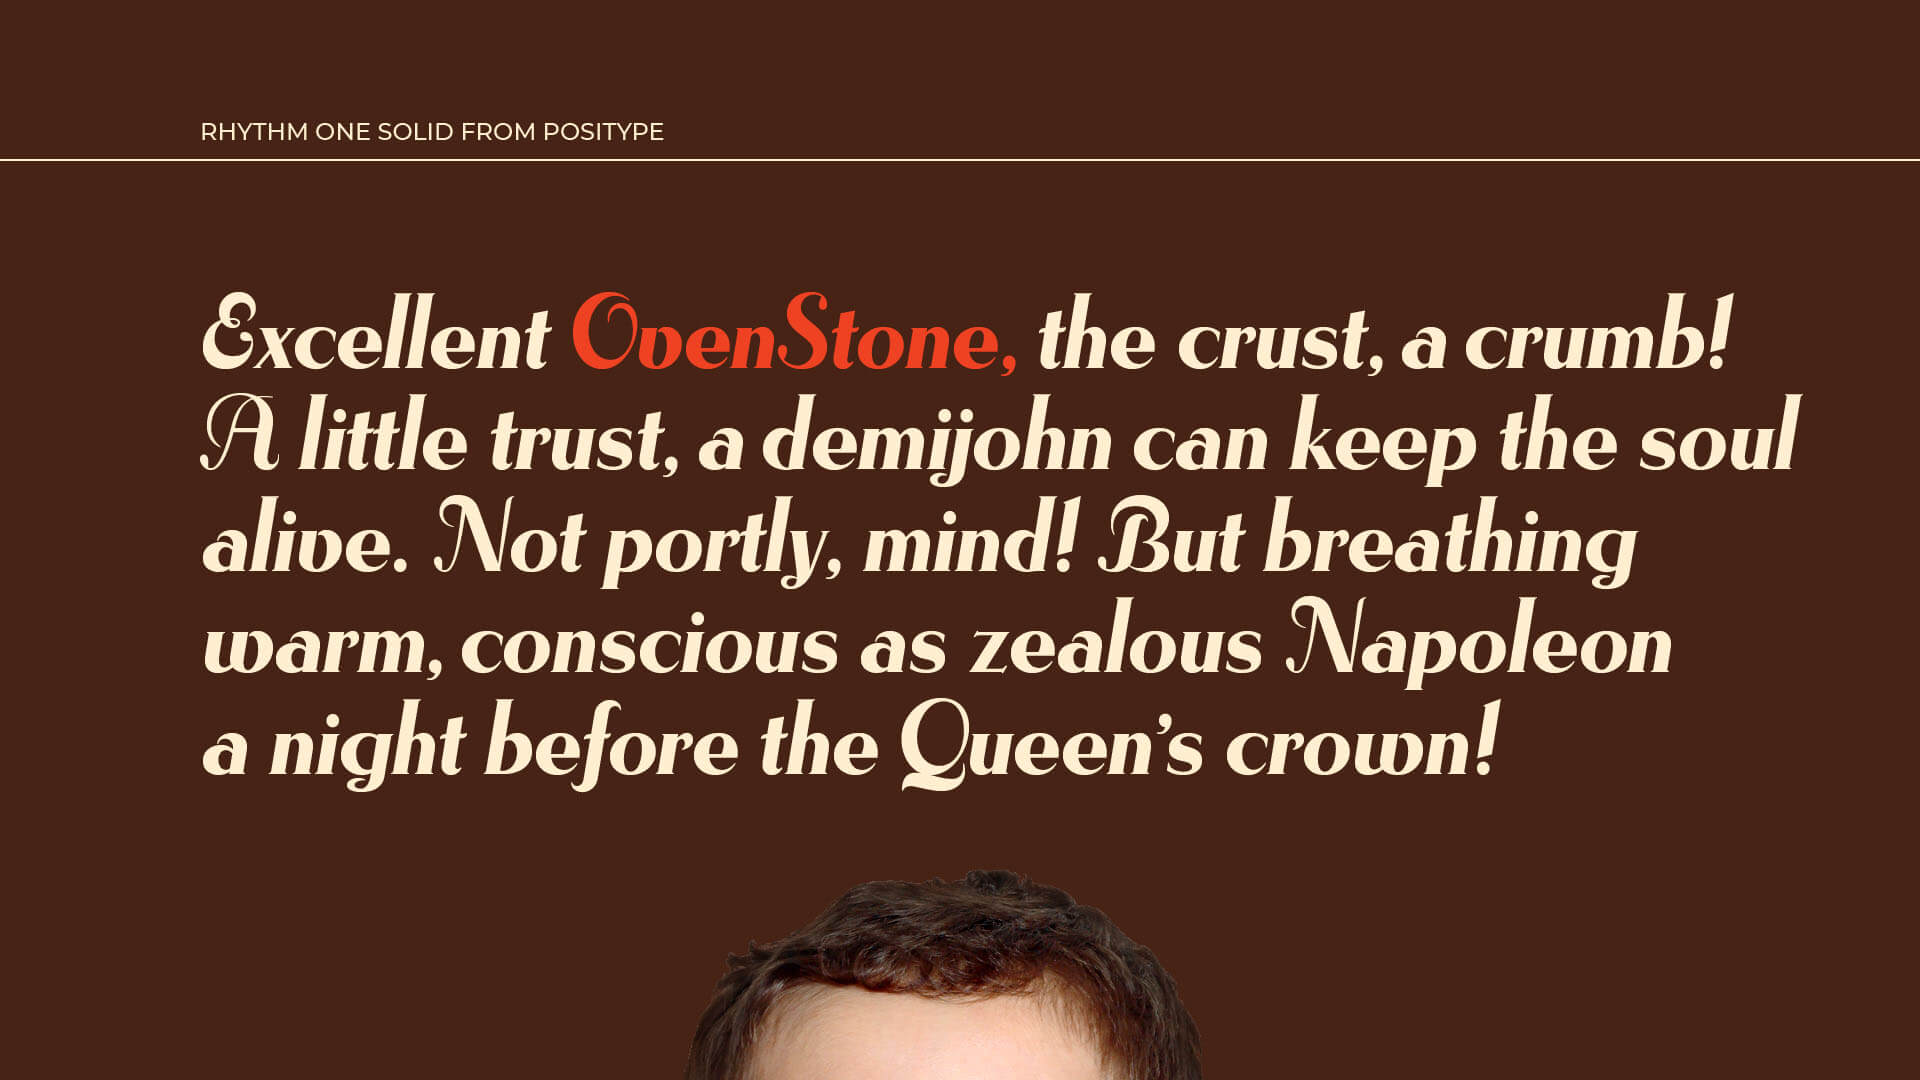 Rhythm One Solid Type Specimen Pangram: Excellent OvenStone, the crust, a crumb! A little trust, a demijohn can keep the soul alive. Not portly, mind! But breathing warm, conscious as zealous Napoleona night before the Queen’s crown!